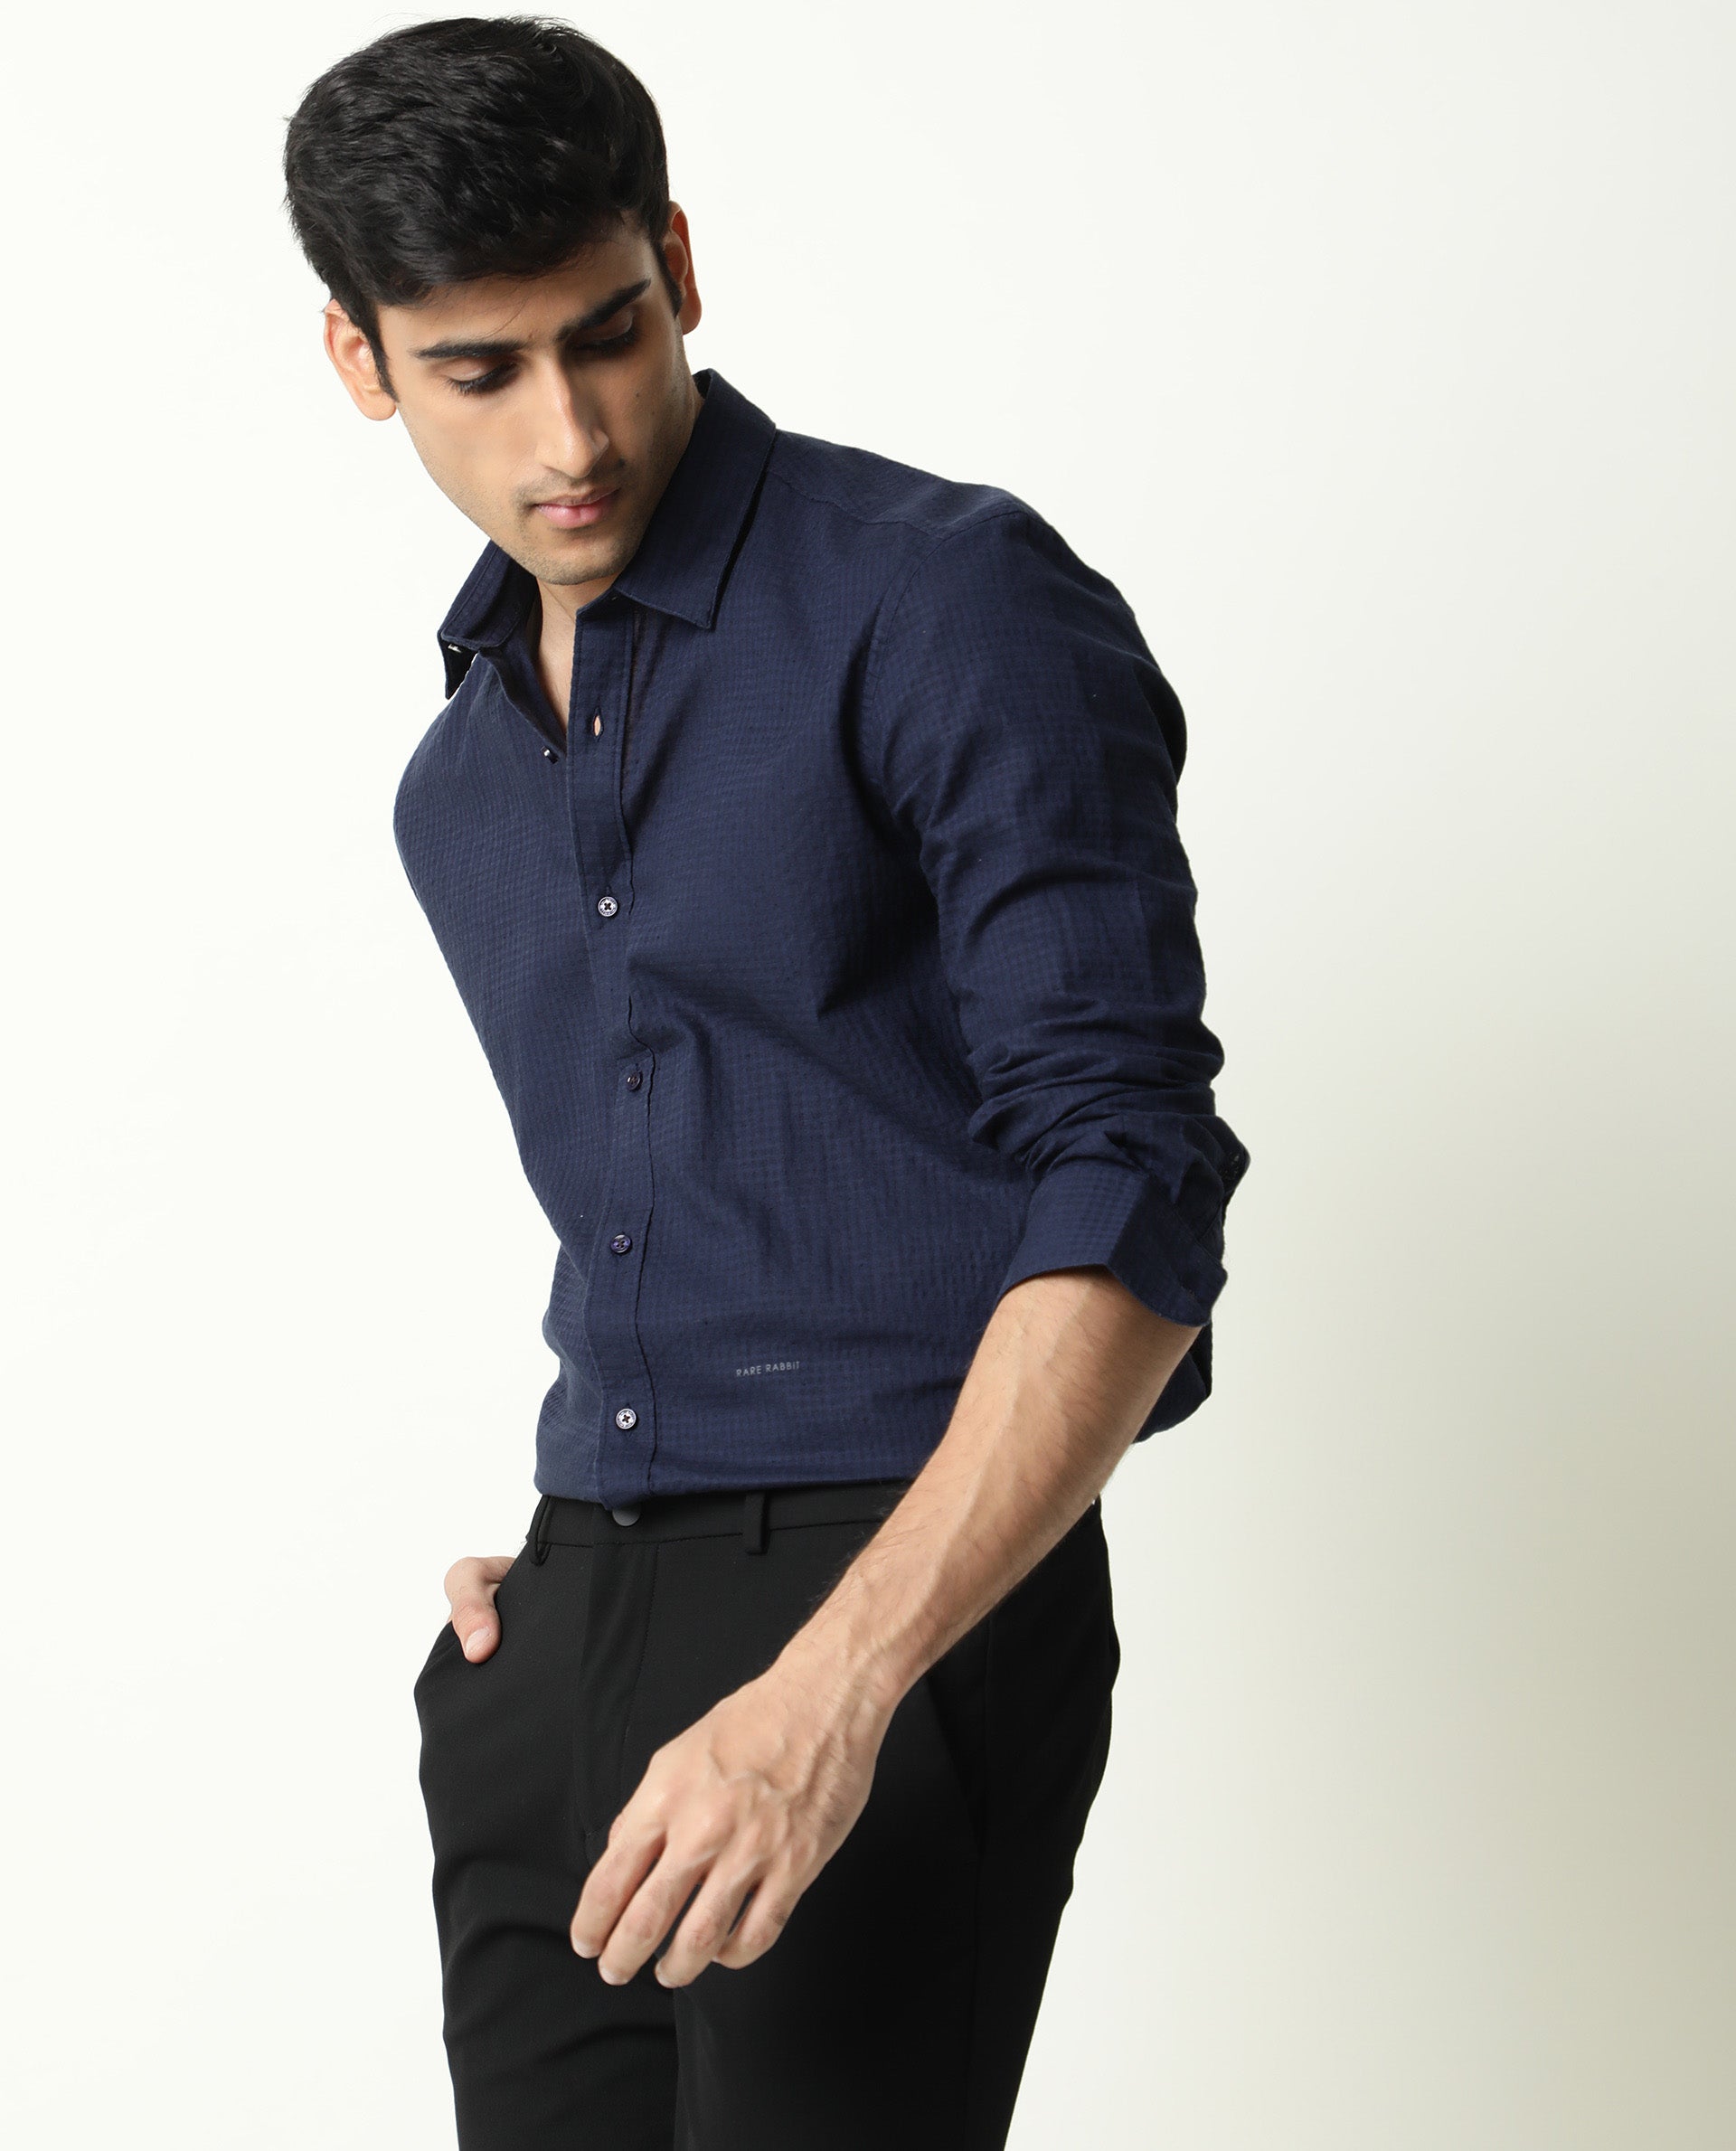 How To Wear A Navy Shirt With Black Pants • Ready Sleek